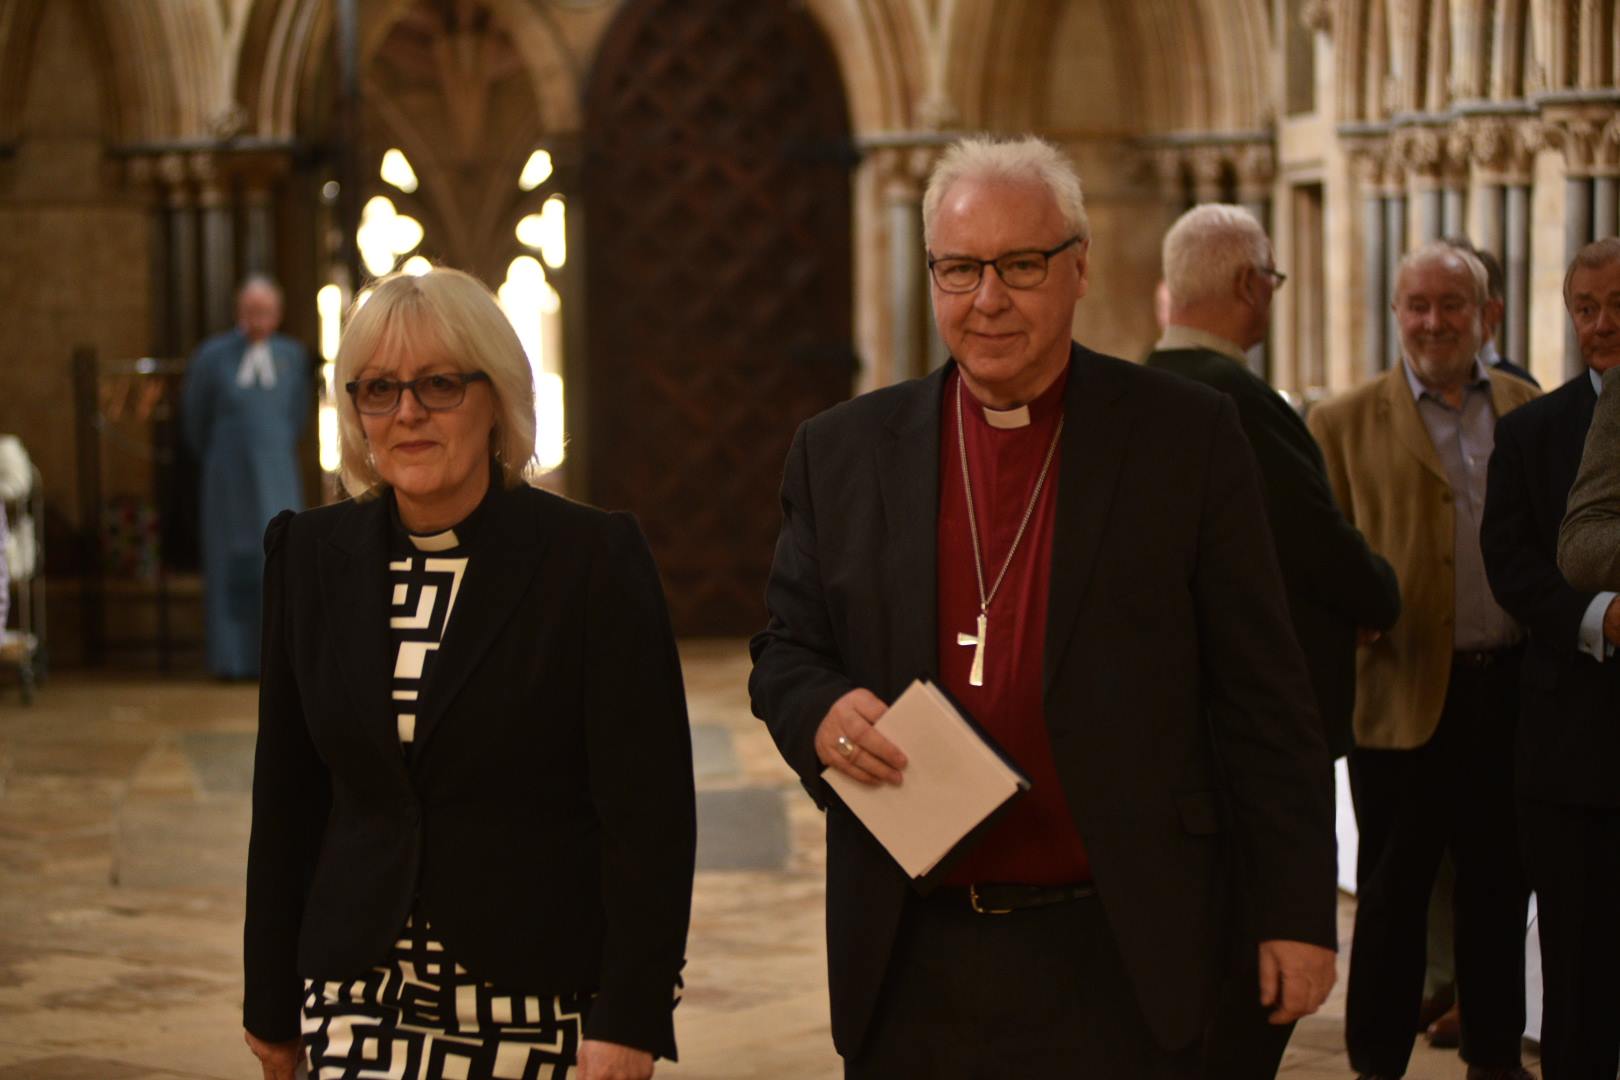 Dean of Lincoln Christine Wilson and Bishop of Lincoln Christopher Lowson. Photo: Steve Smailes for The Lincolnite